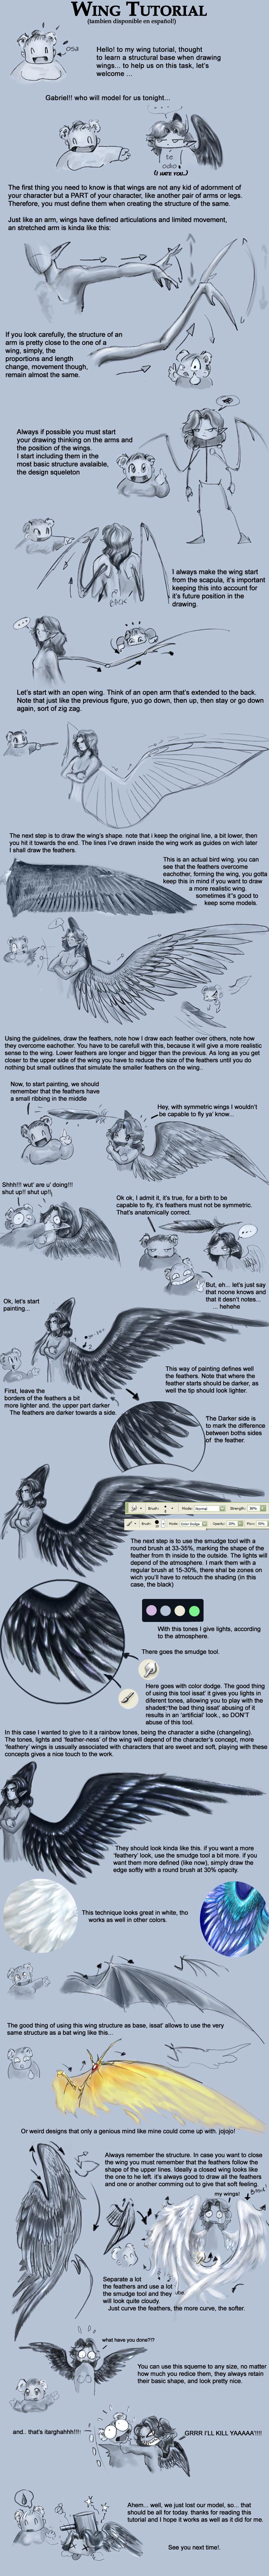 Wings Tutorial in english :D